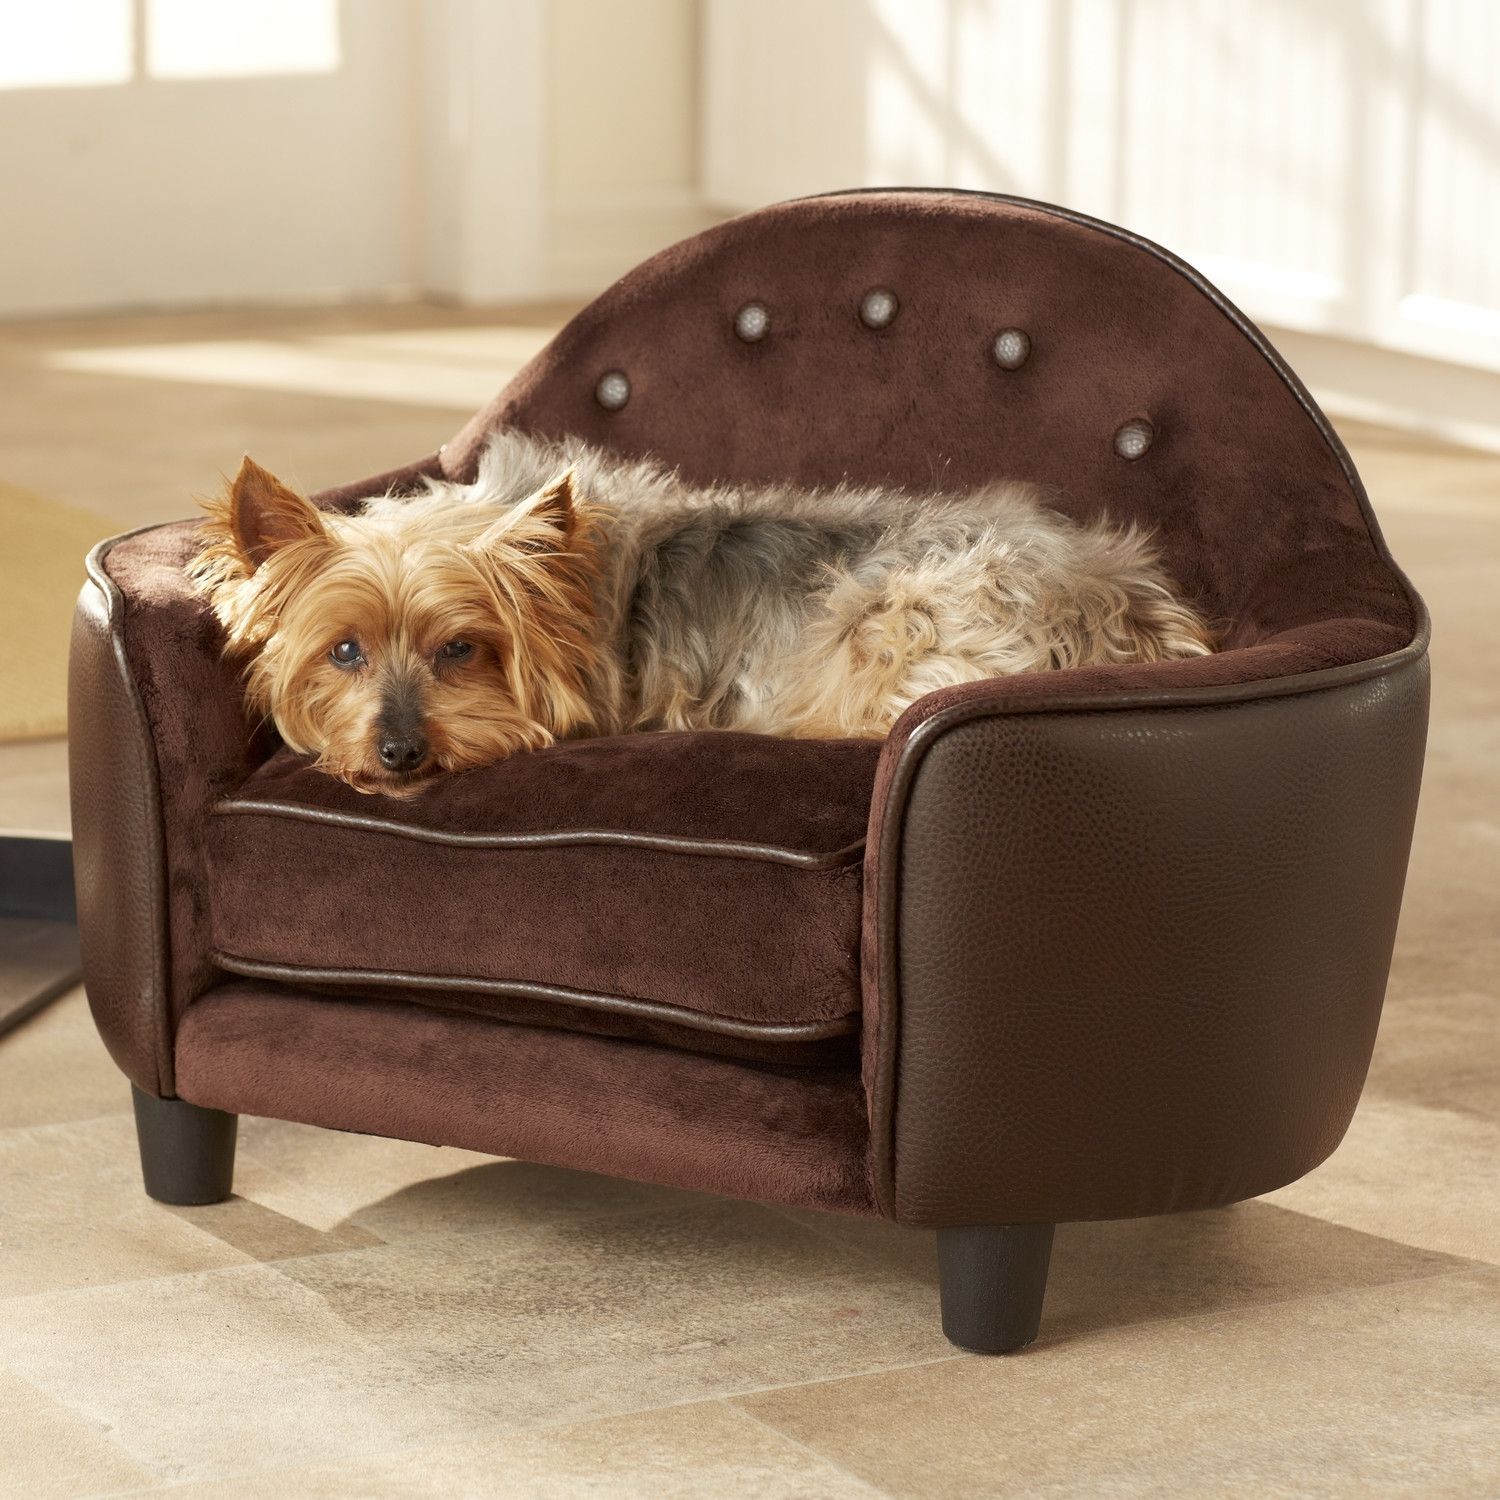 Dog Sofas And Chairs Uk Hereo Sofa Pertaining To Sofas For Dogs (View 1 of 15)